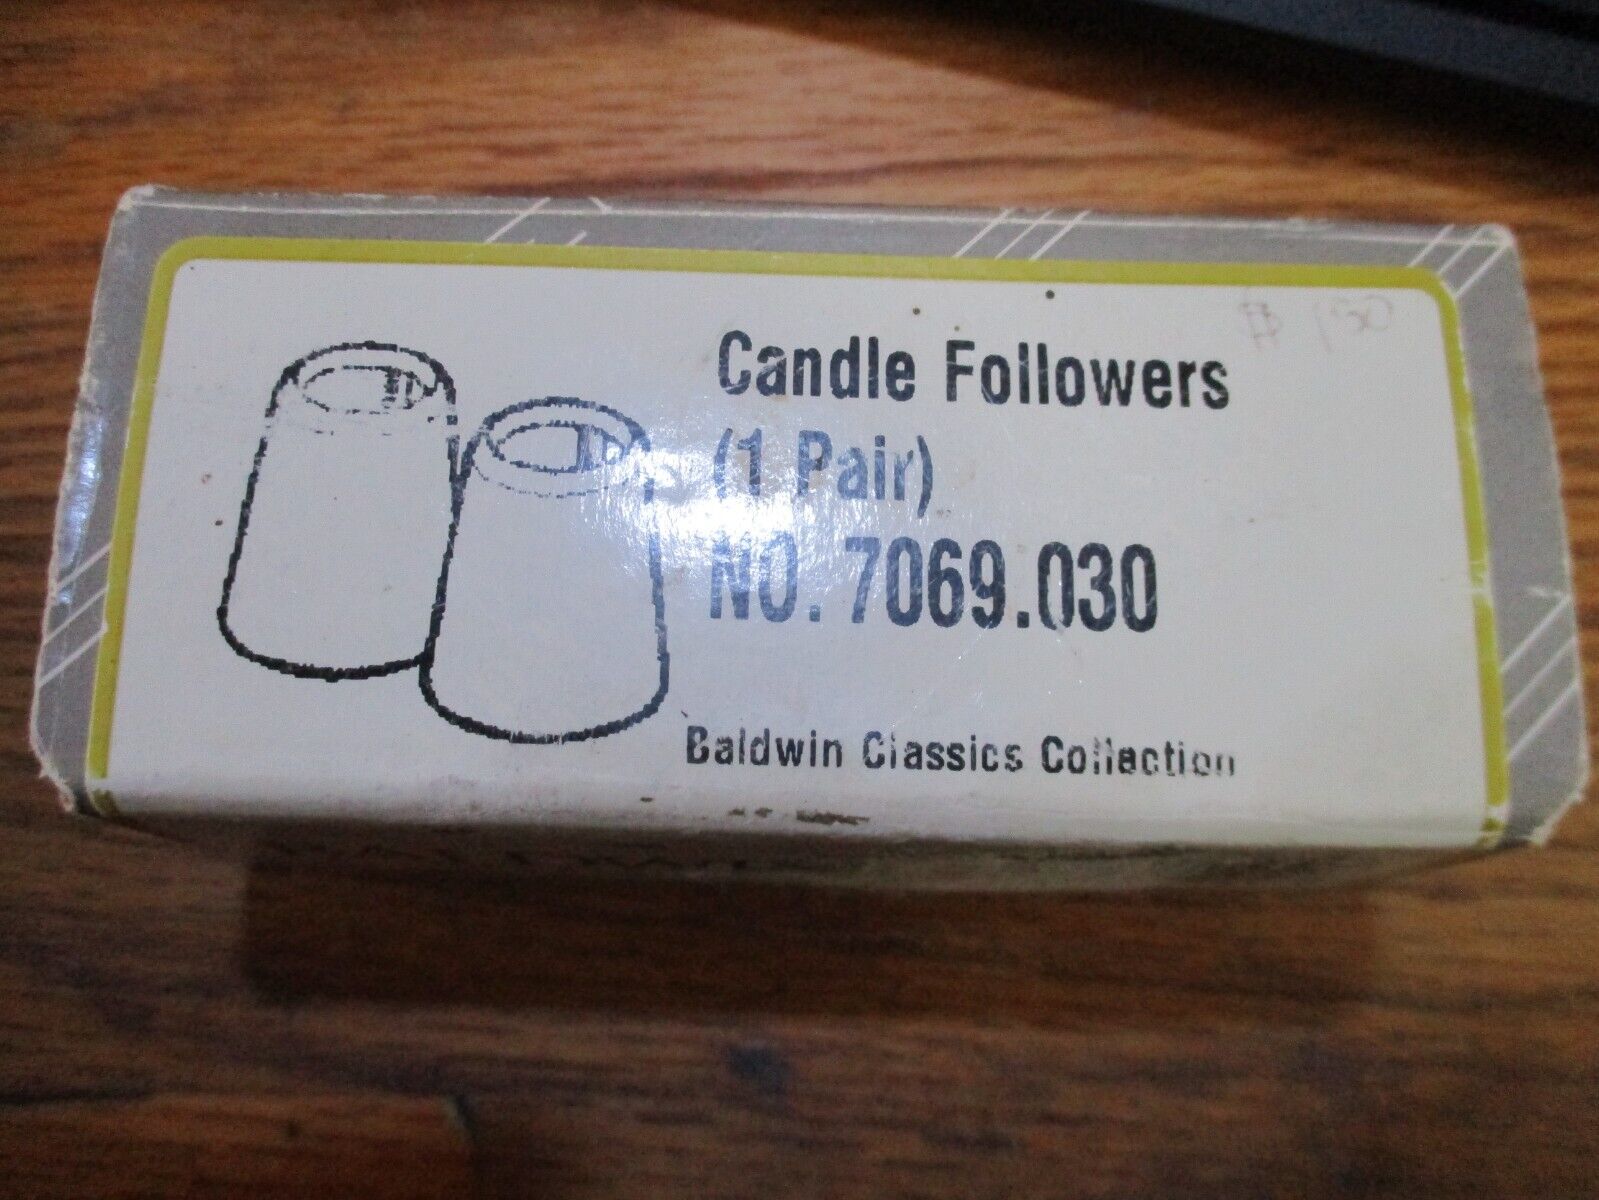 Baldwin Brass Vintage Candle Followers Chasers NIB #7069.030 New In Box One Pair